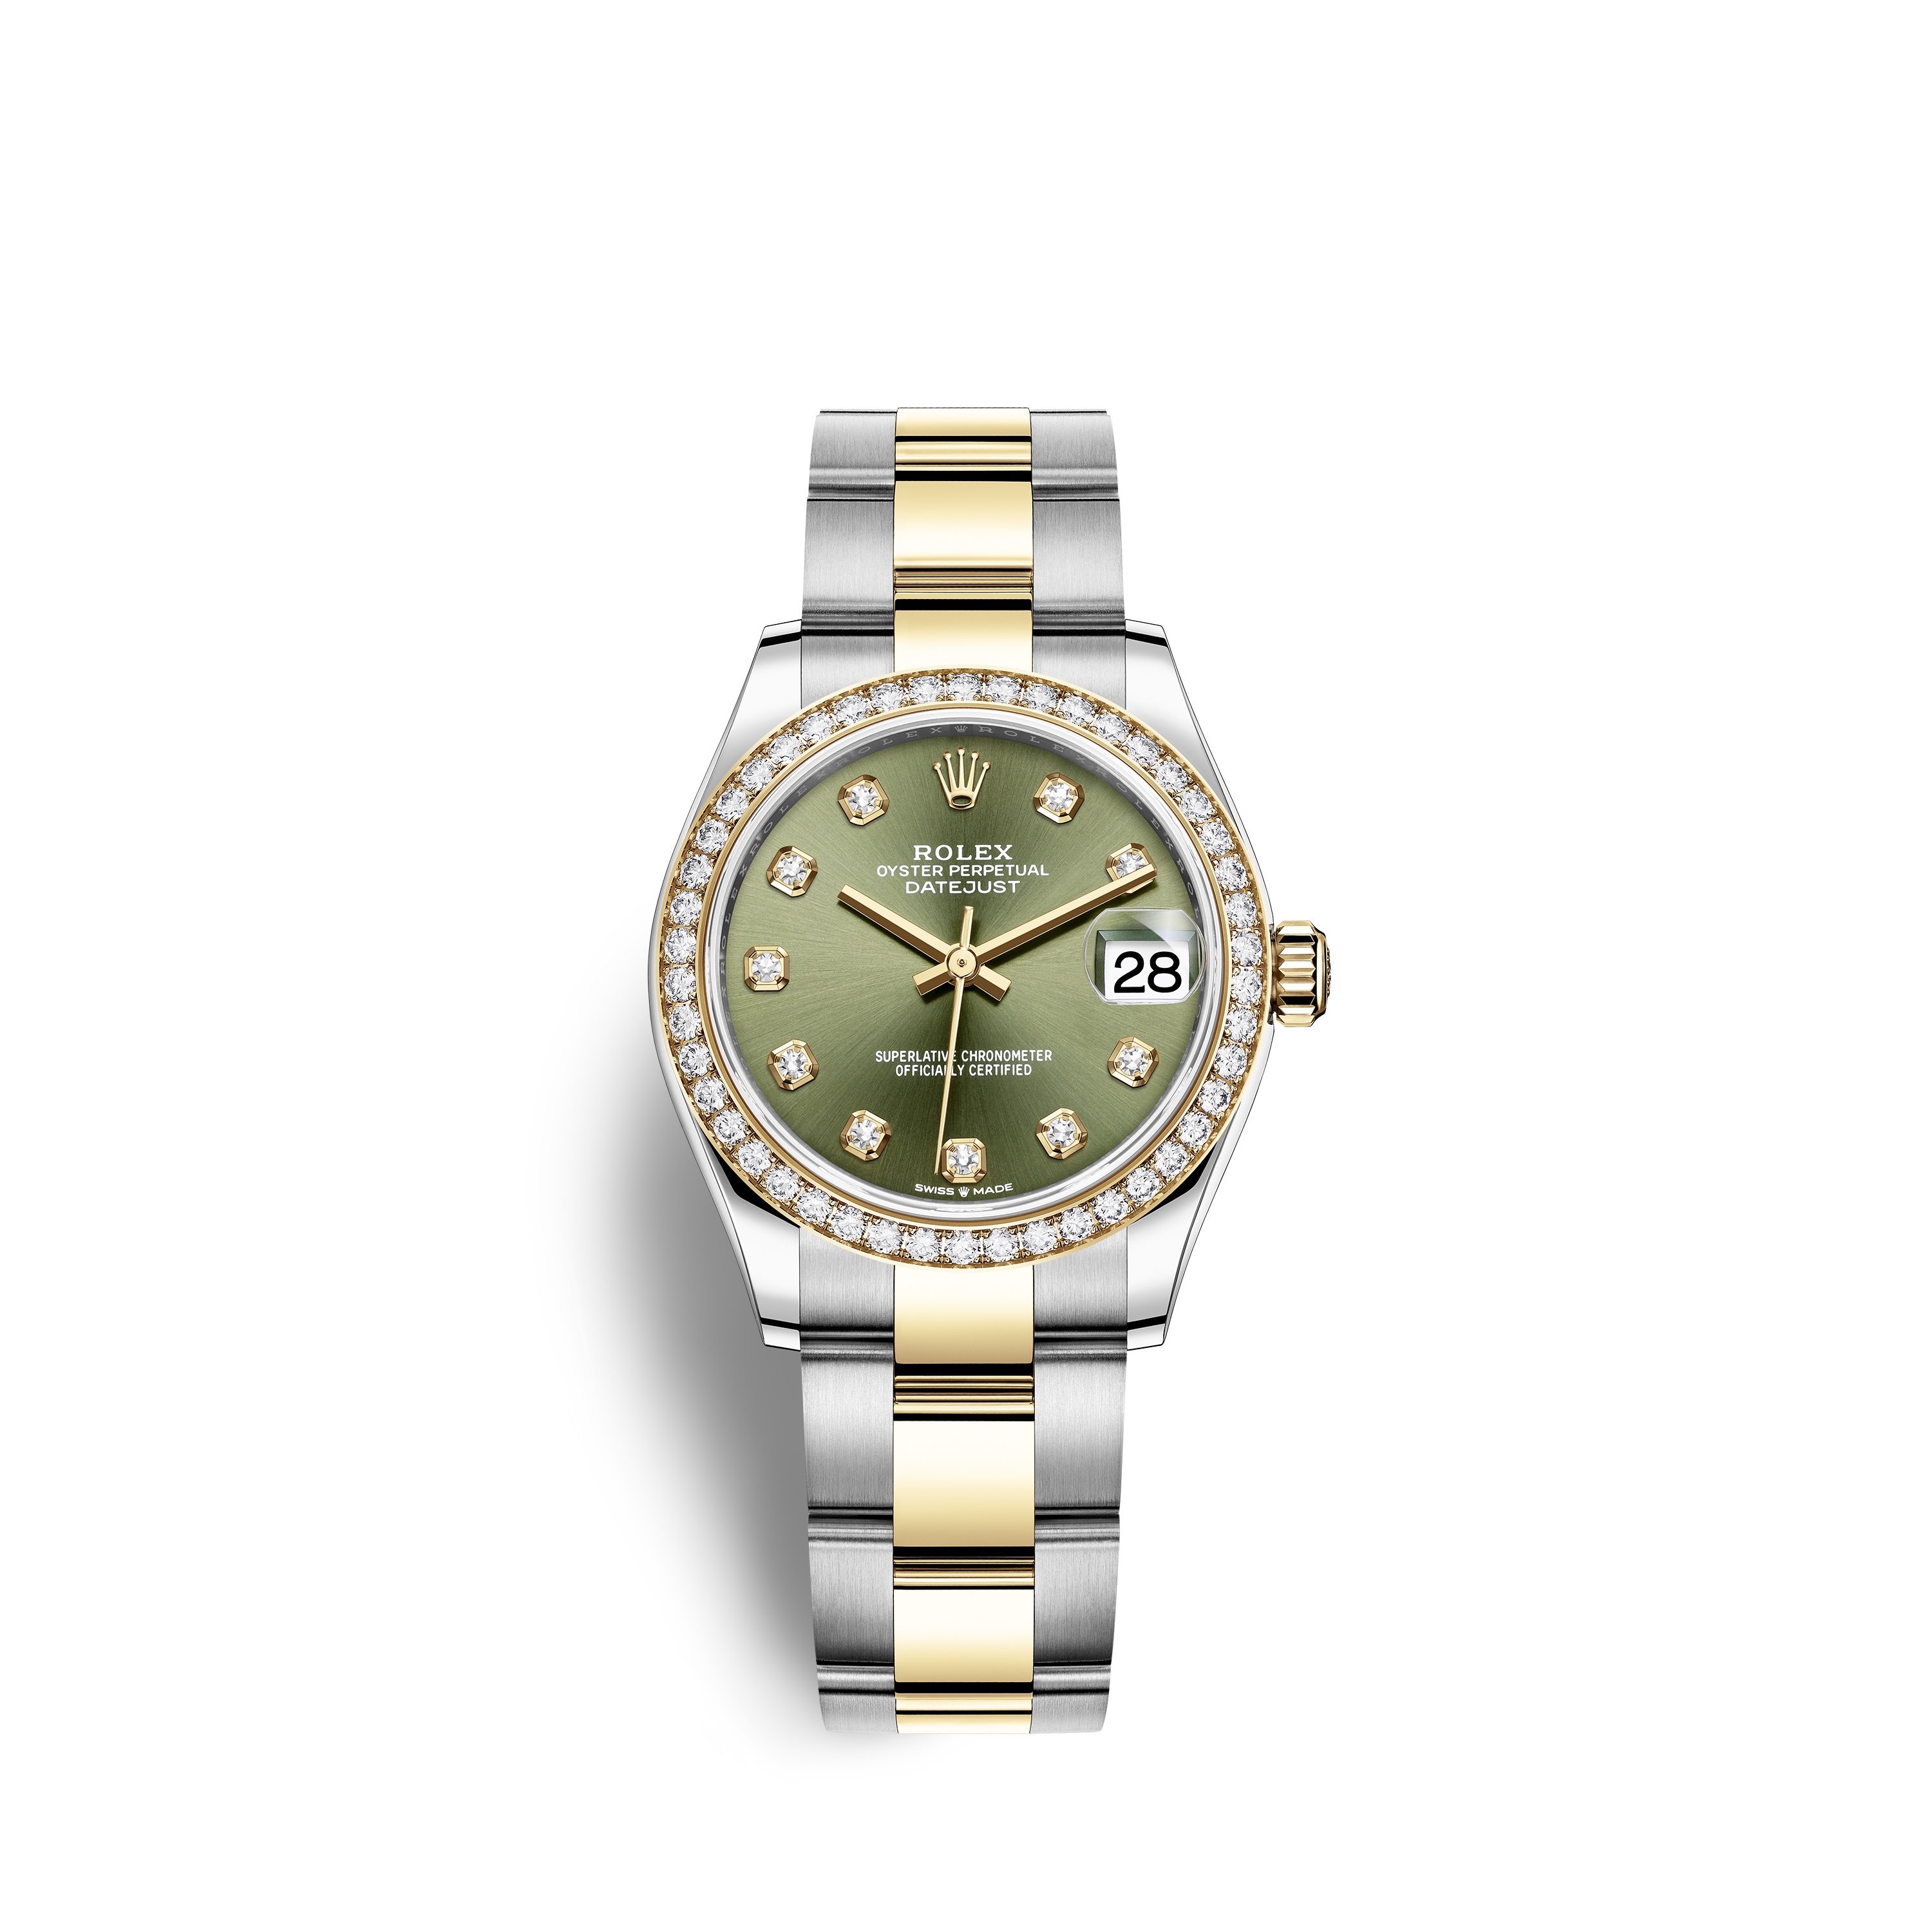 Datejust 31 278383RBR Gold & Stainless Steel Watch (Olive Green Set with Diamonds) - Click Image to Close